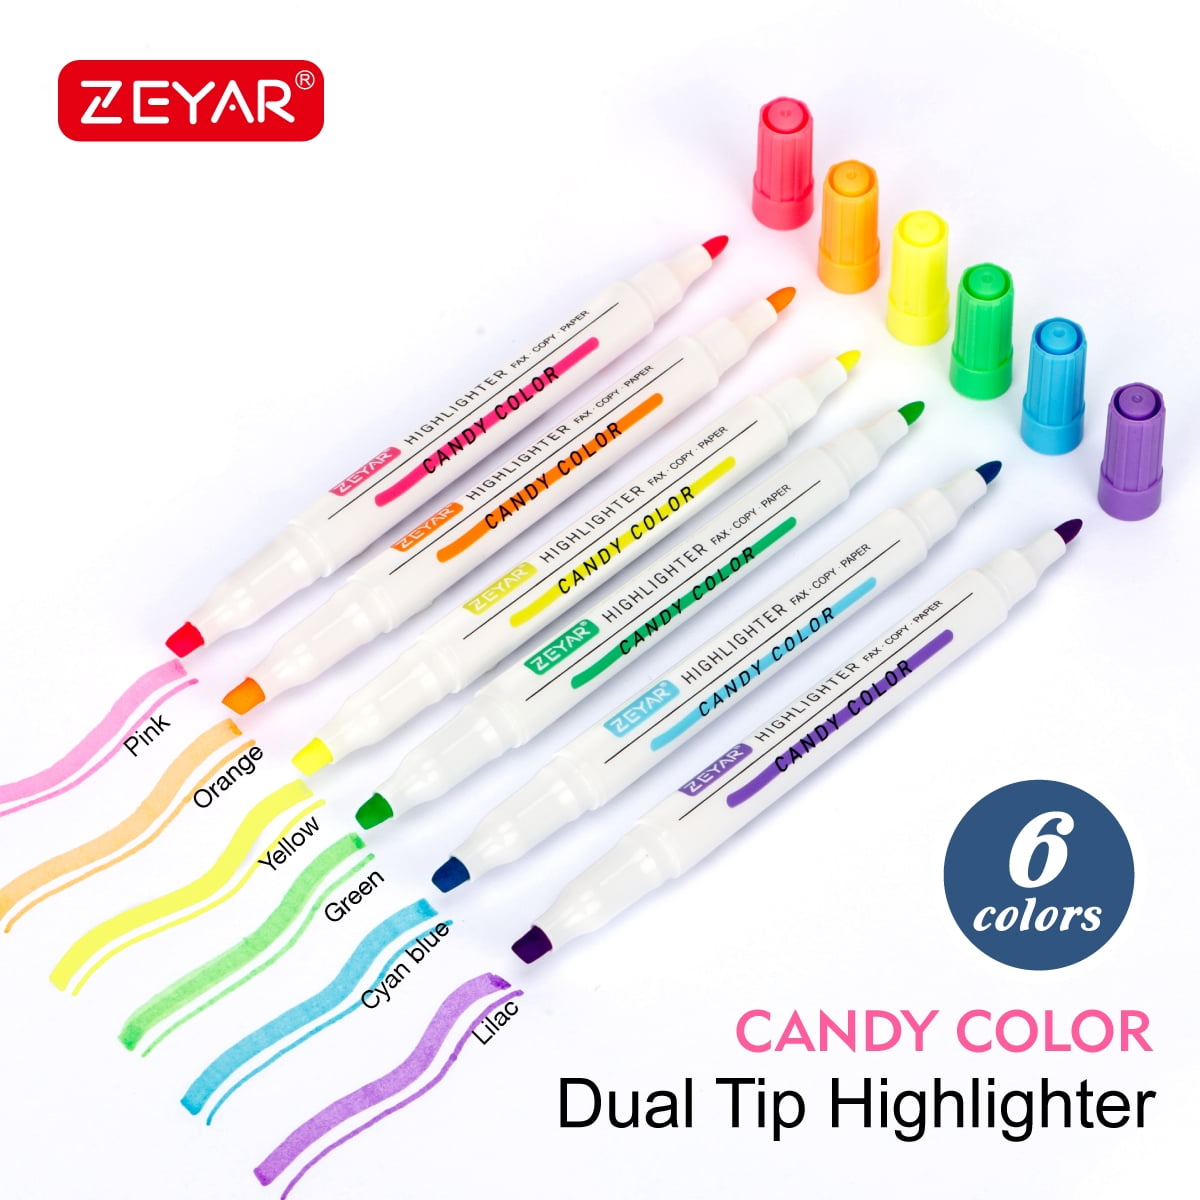 ZEYAR Highlighter, Pastel Colors Chisel Tip Marker Pen, Assorted Colors,  Water Based, Quick Dry (6 Macaron Colors)